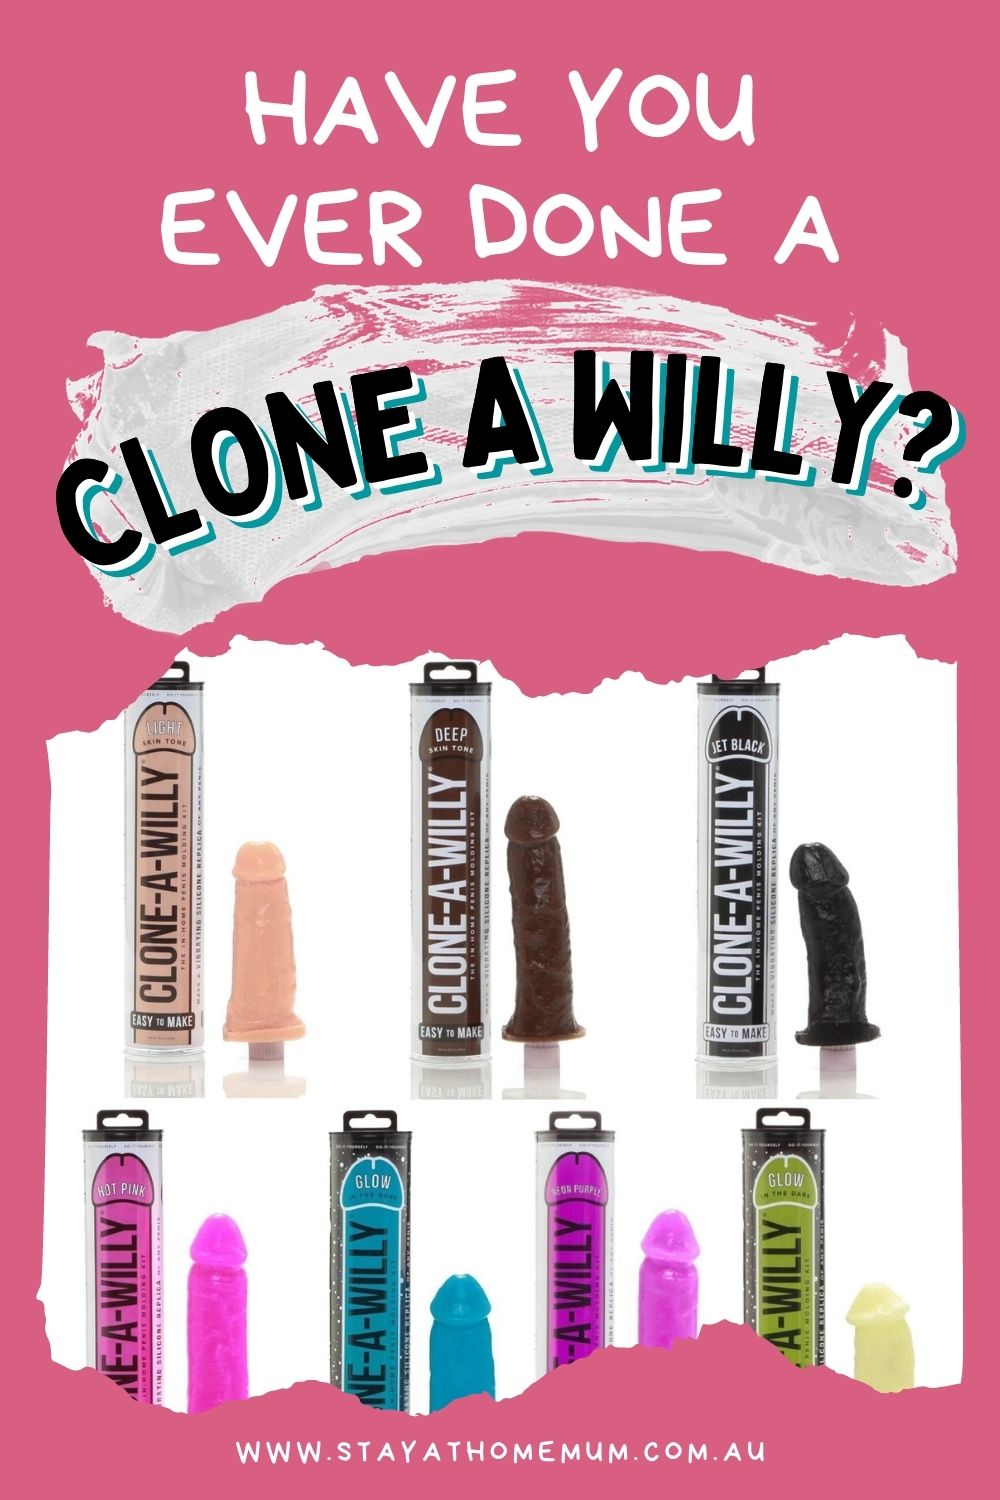 Have you ever done a Clone a Willy? | Stay at Home Mum